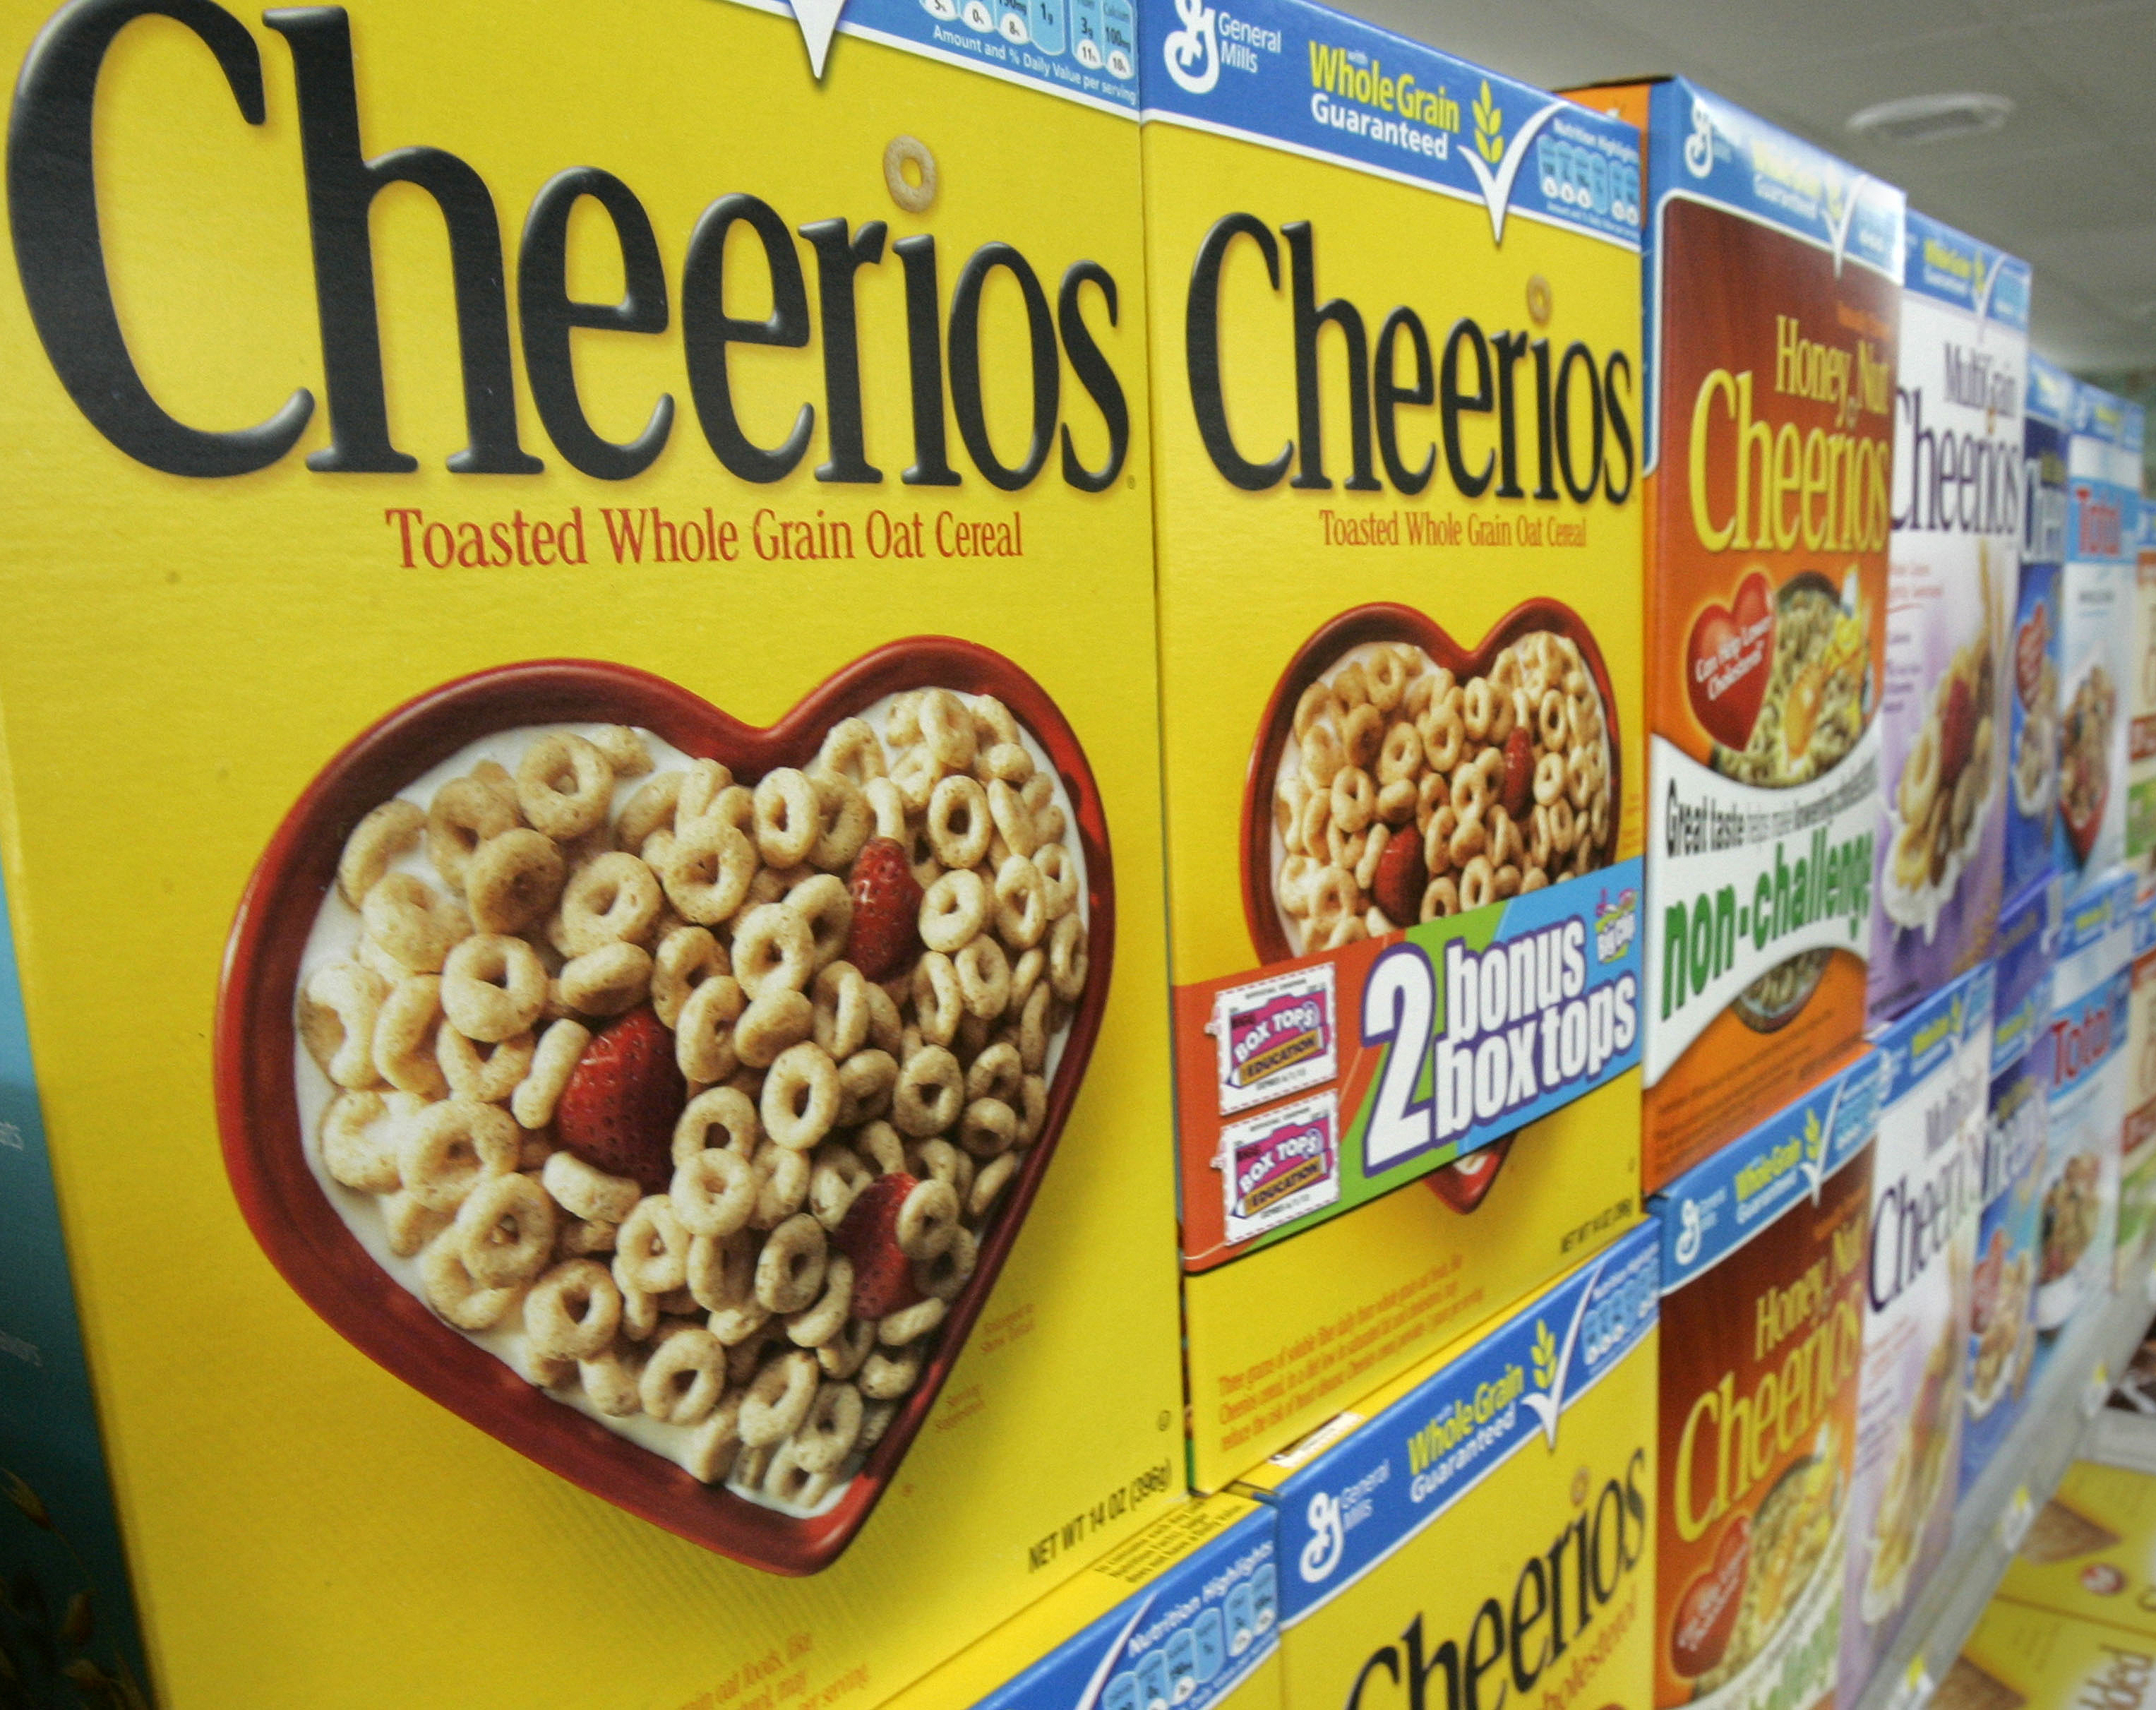 General Mills recalling 1.8M Cheerios boxes on allergy risk